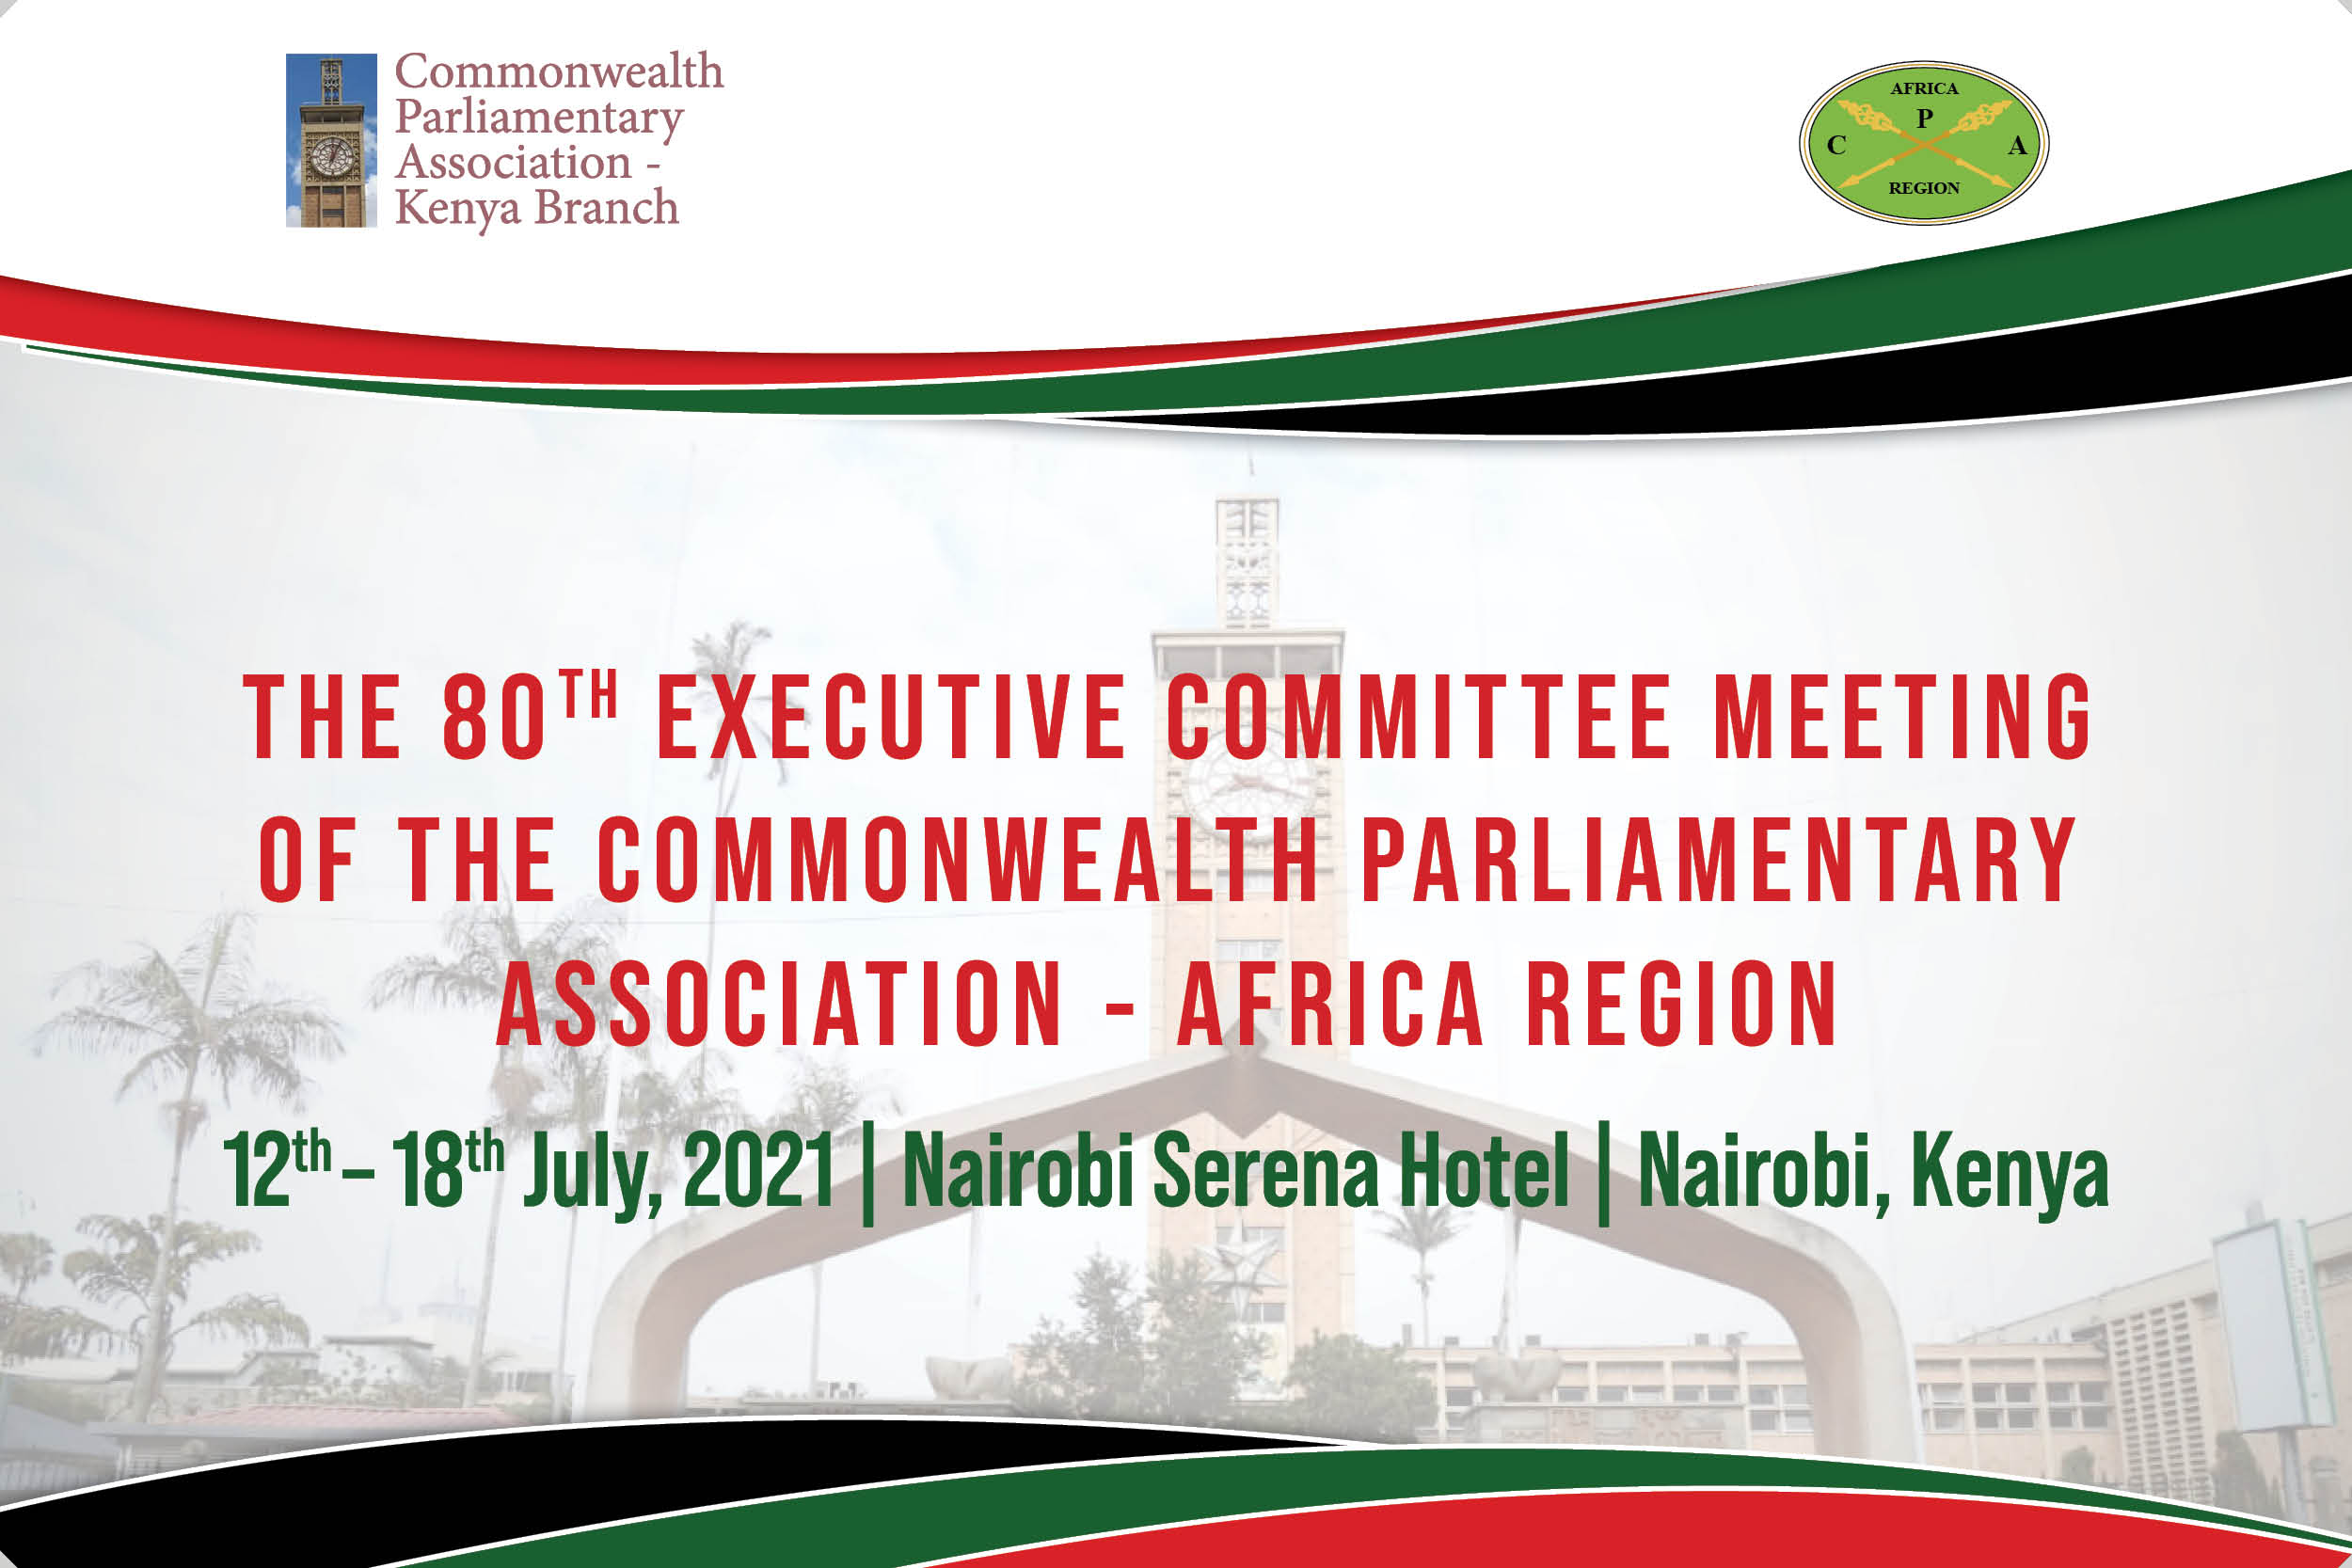 The 80th Commonwealth Parliamentary Association (CPA) Executive Meeting Convenes in Nairobi from 12th – 18th July, 2021